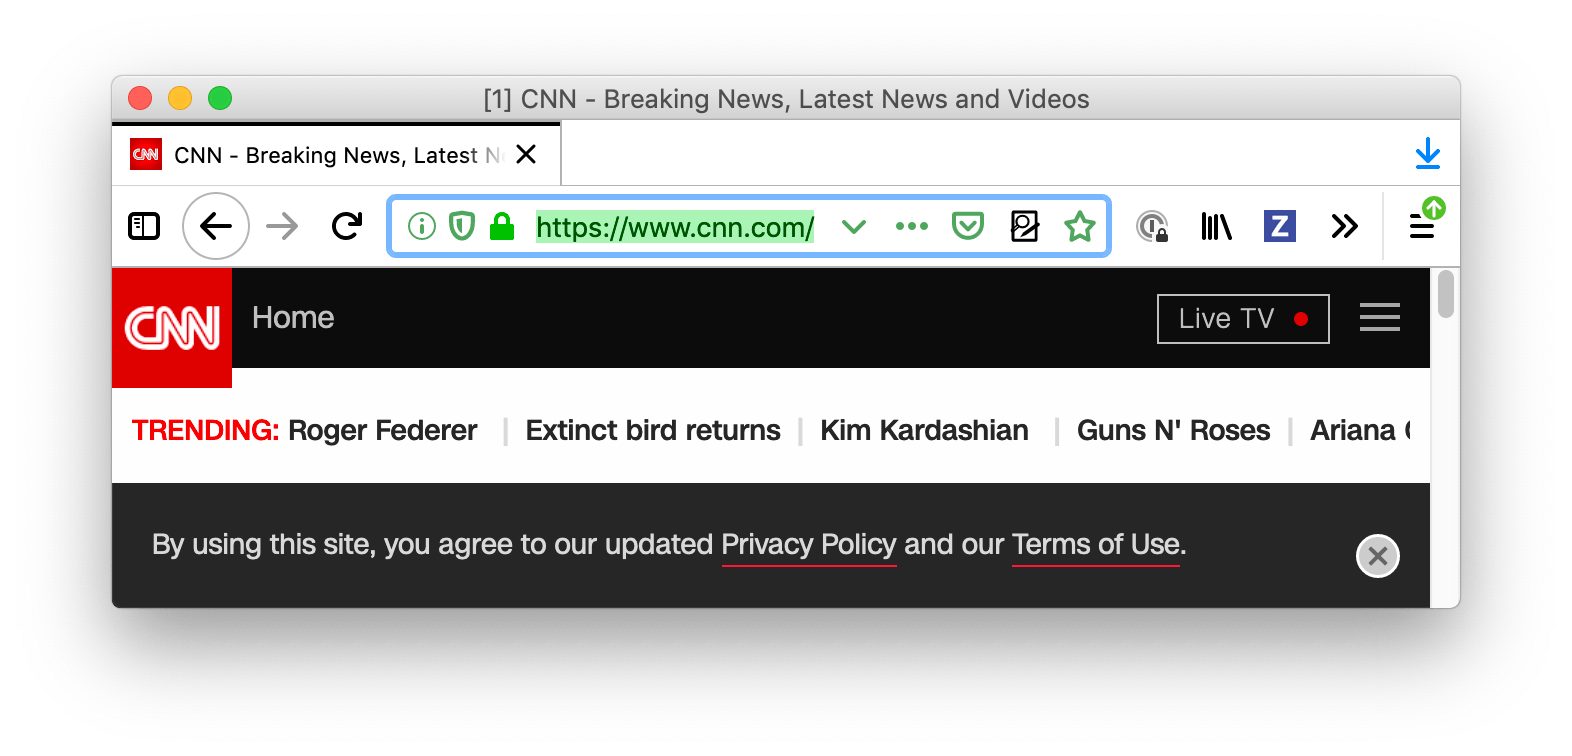 Example showing customized text and highlight colors in the URL bar